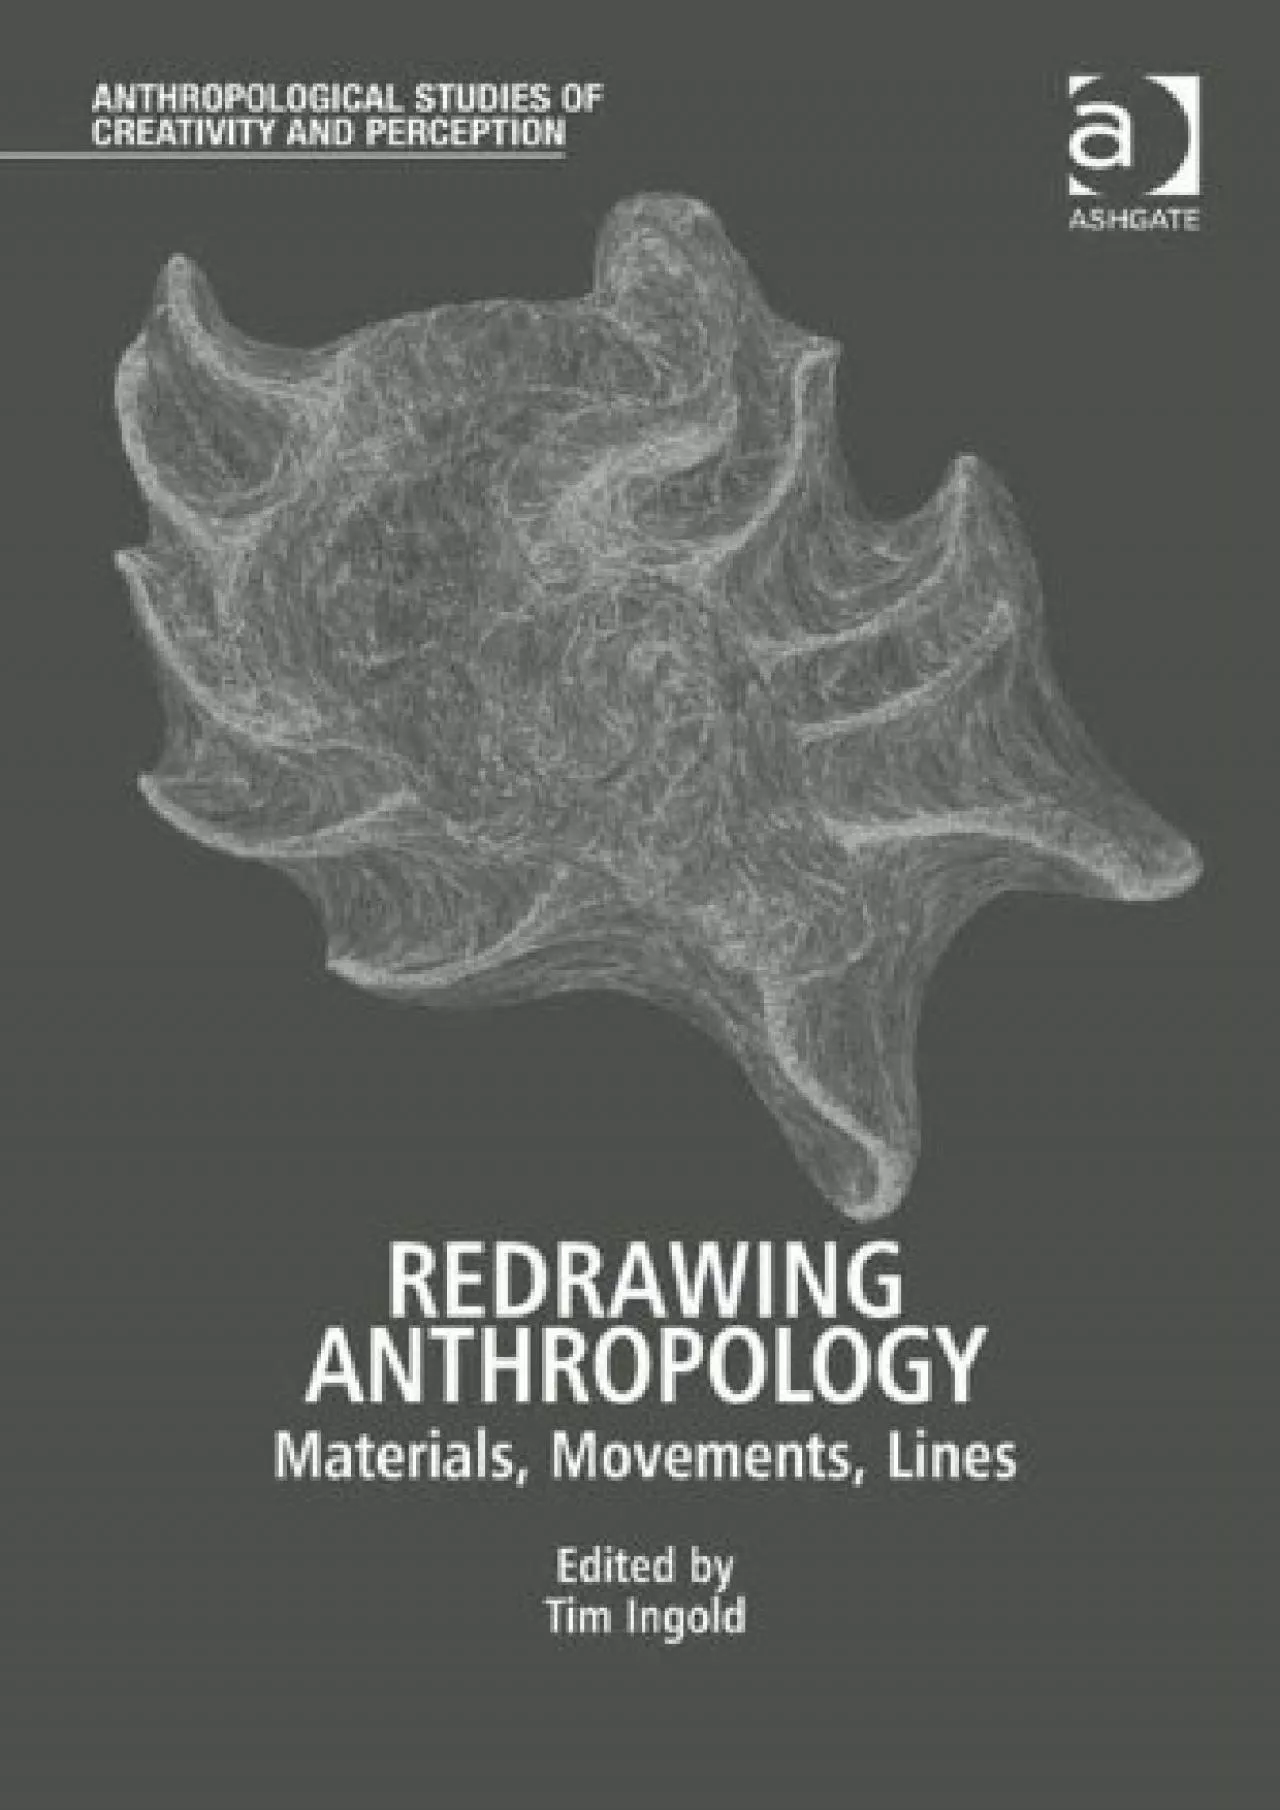 (DOWNLOAD)-Redrawing Anthropology: Materials, Movements, Lines (Anthropological Studies